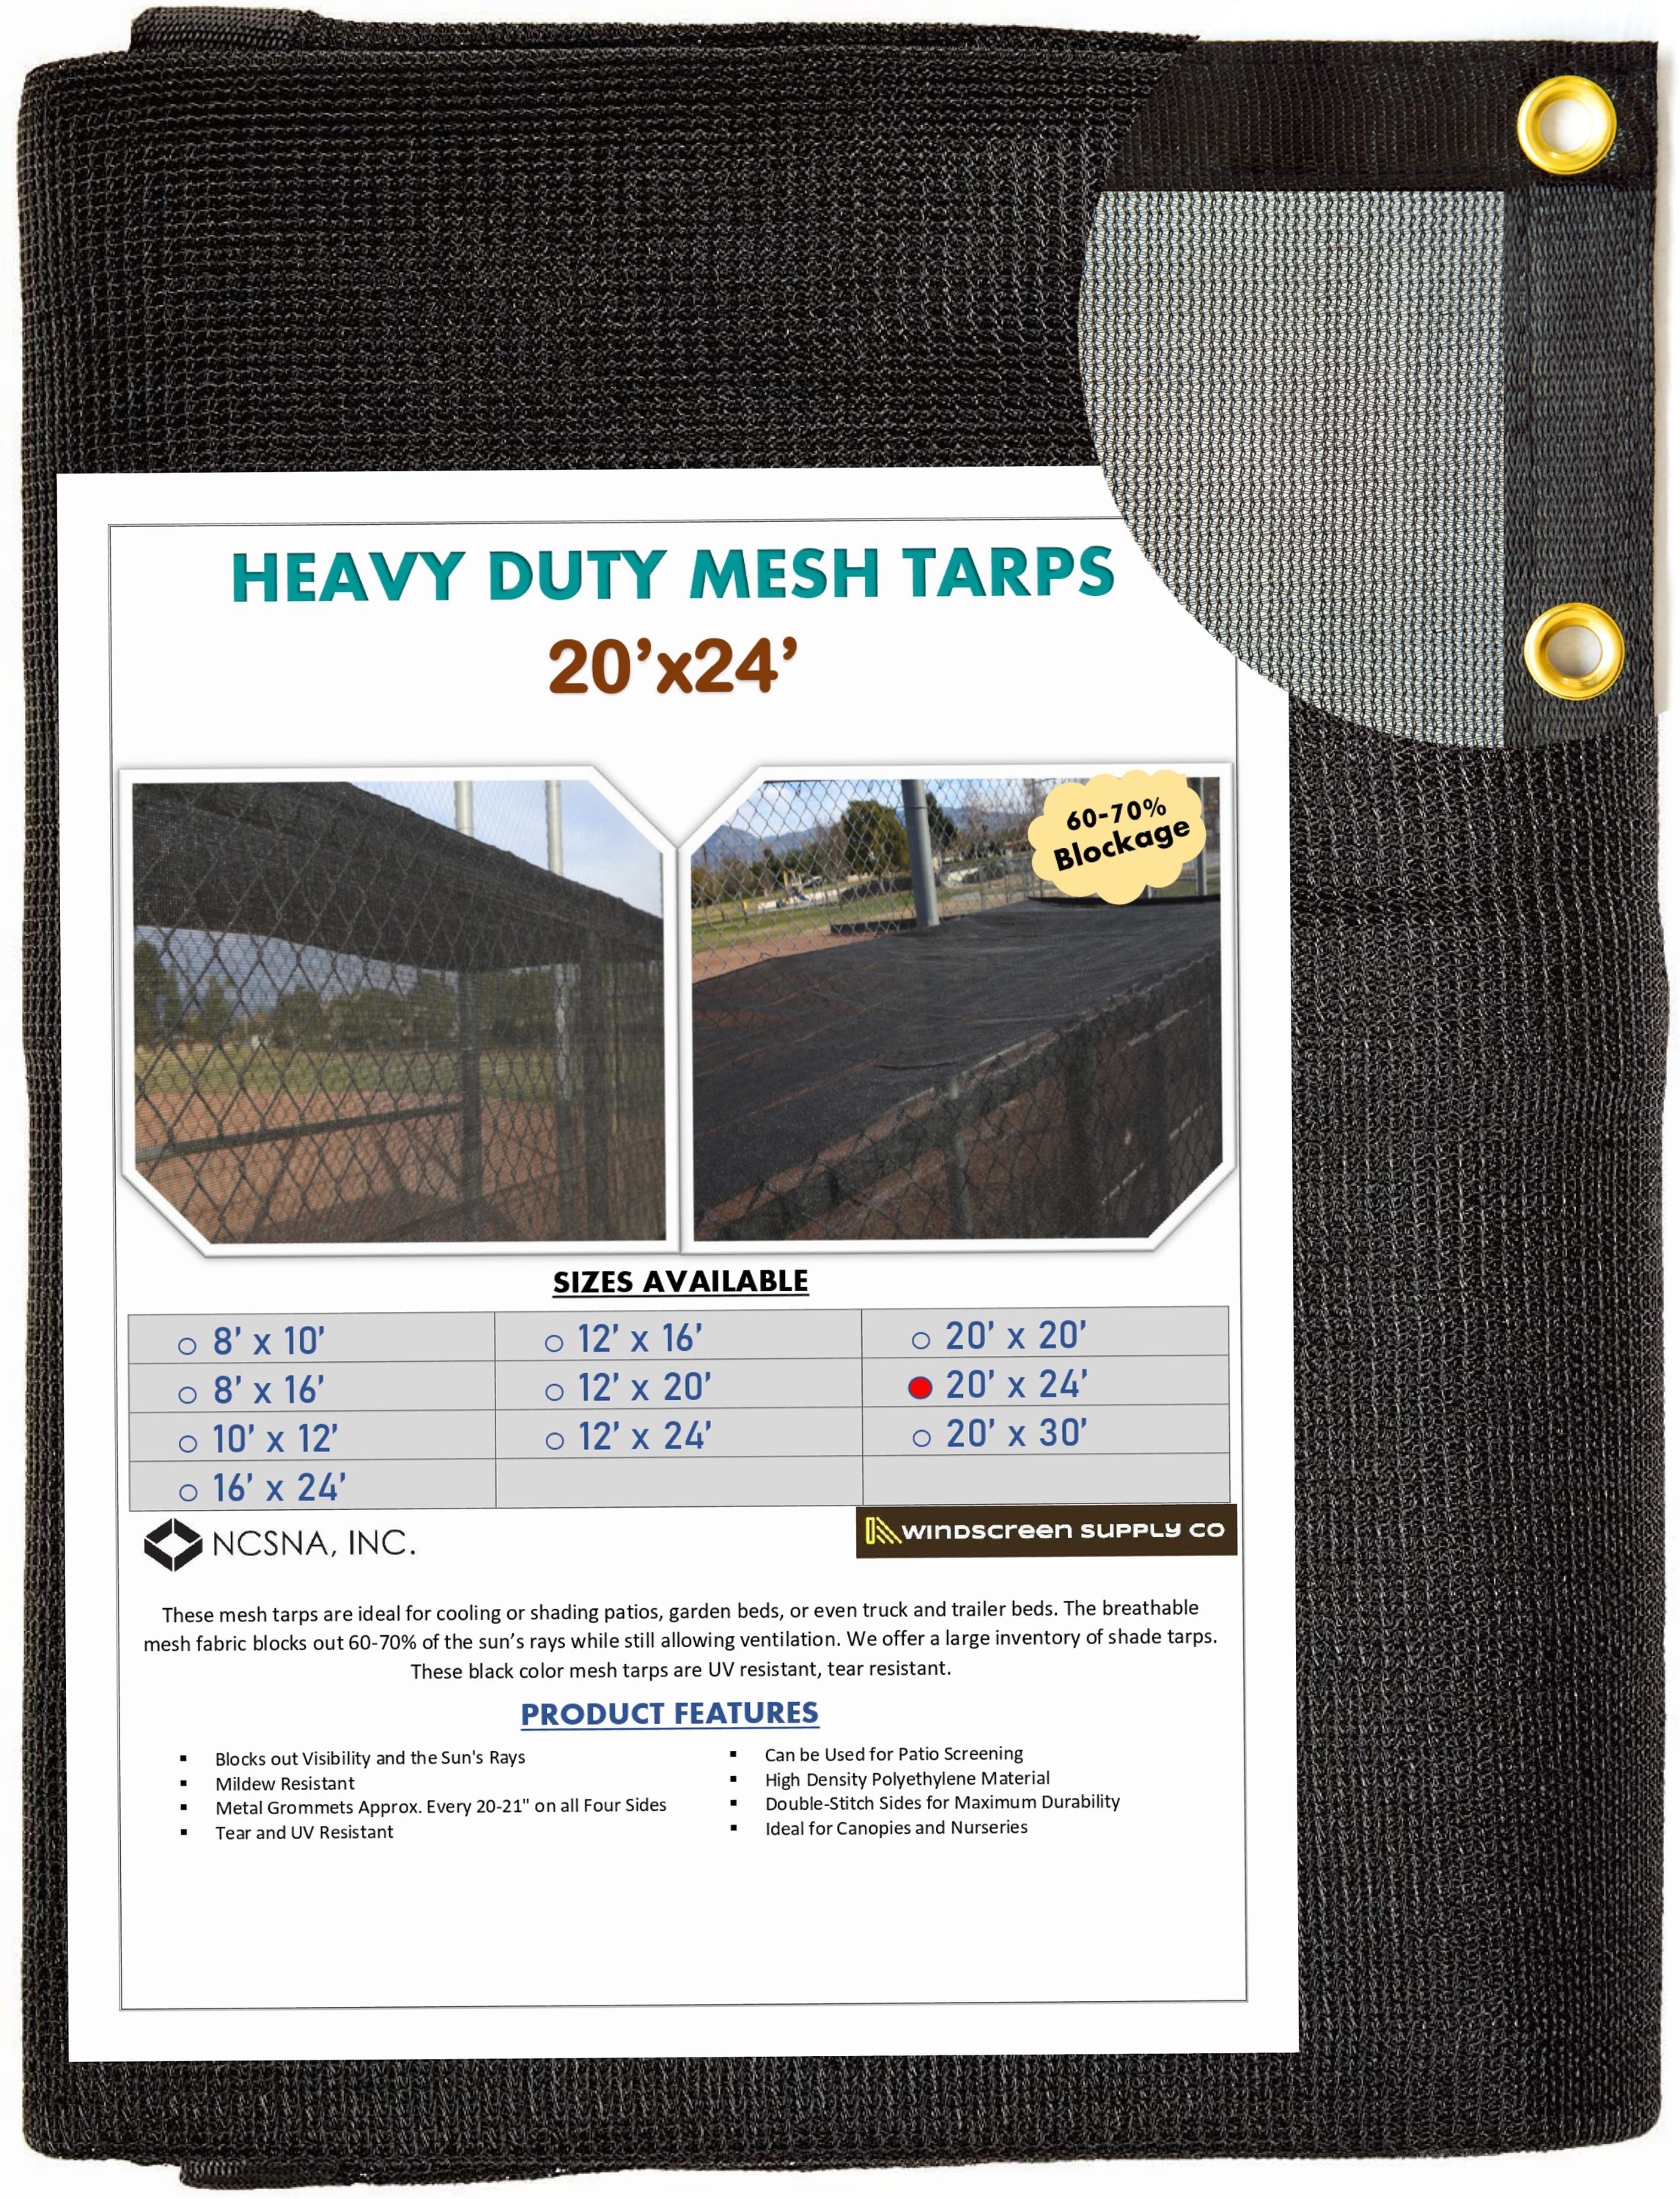 5$ OFF 2 OR MORE 8 X 20  BROWN MESH SCREEN SHADE TARP W/ GROMMETS, 